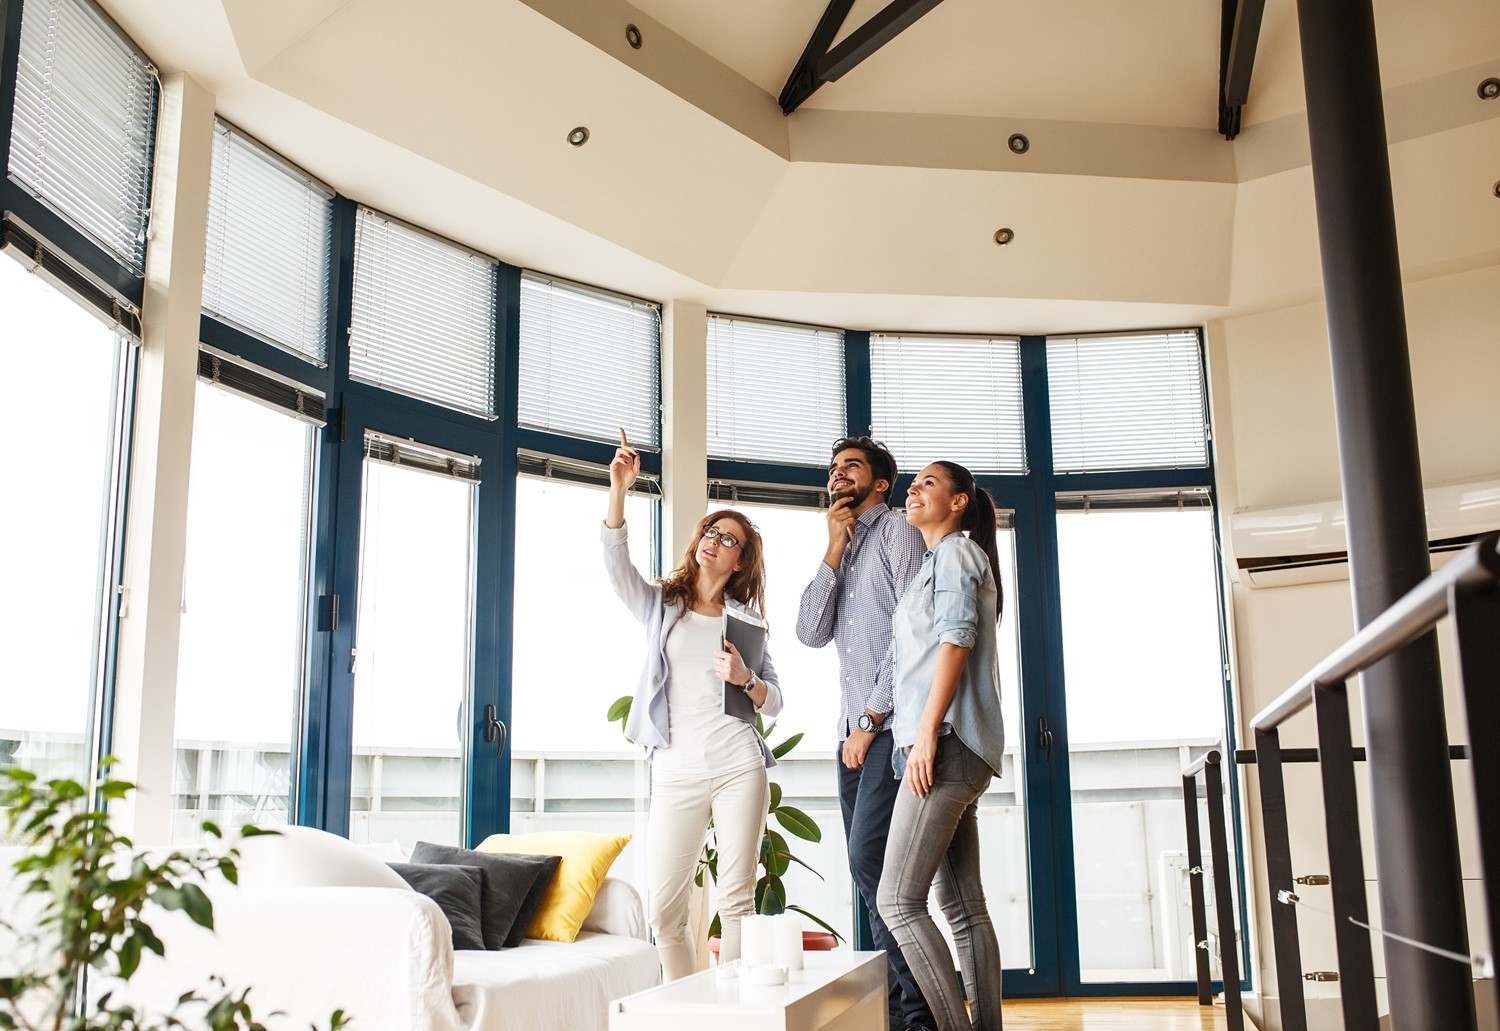 A Female Real Estate Agent Shows a Man and Woman the Vaulted Ceilings in a Room with Tall Windows and Recessed Lighting 